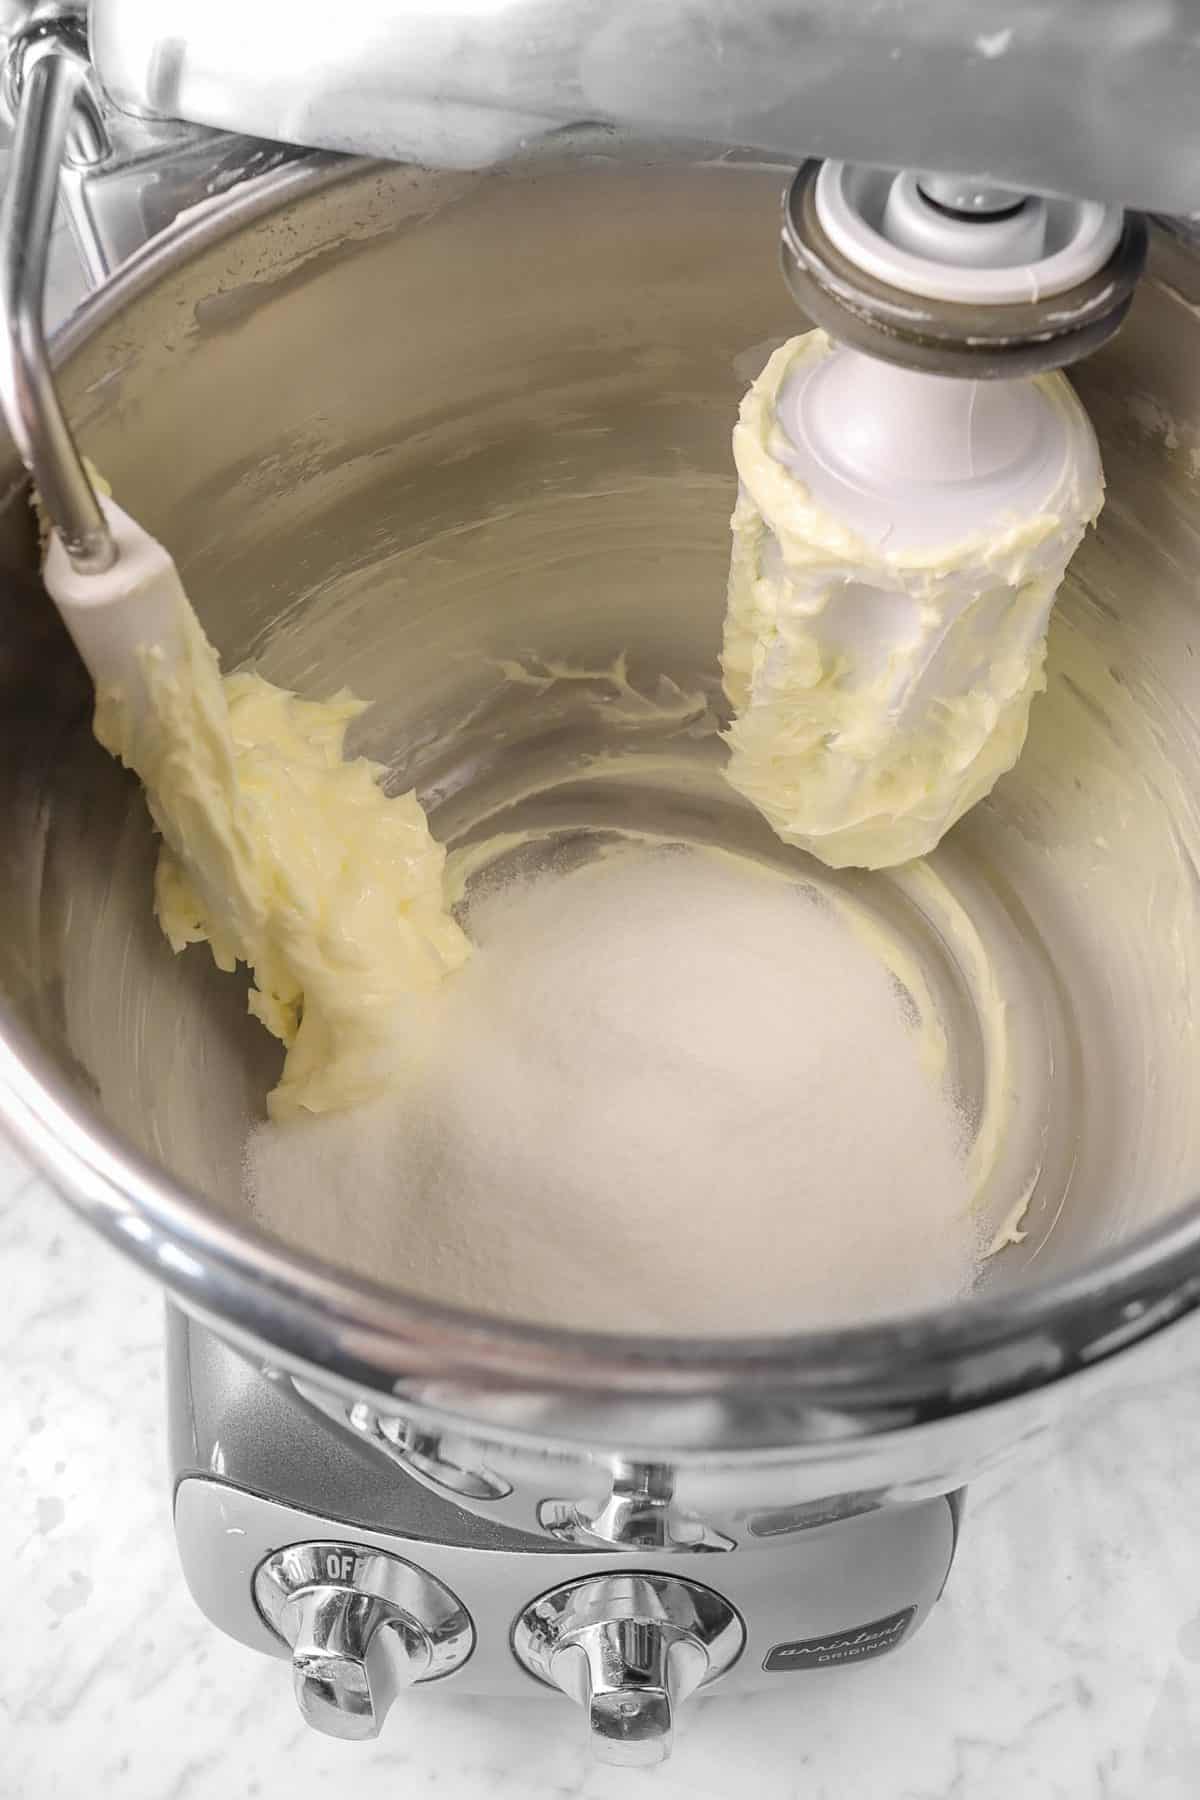 sugar added to creamed butter